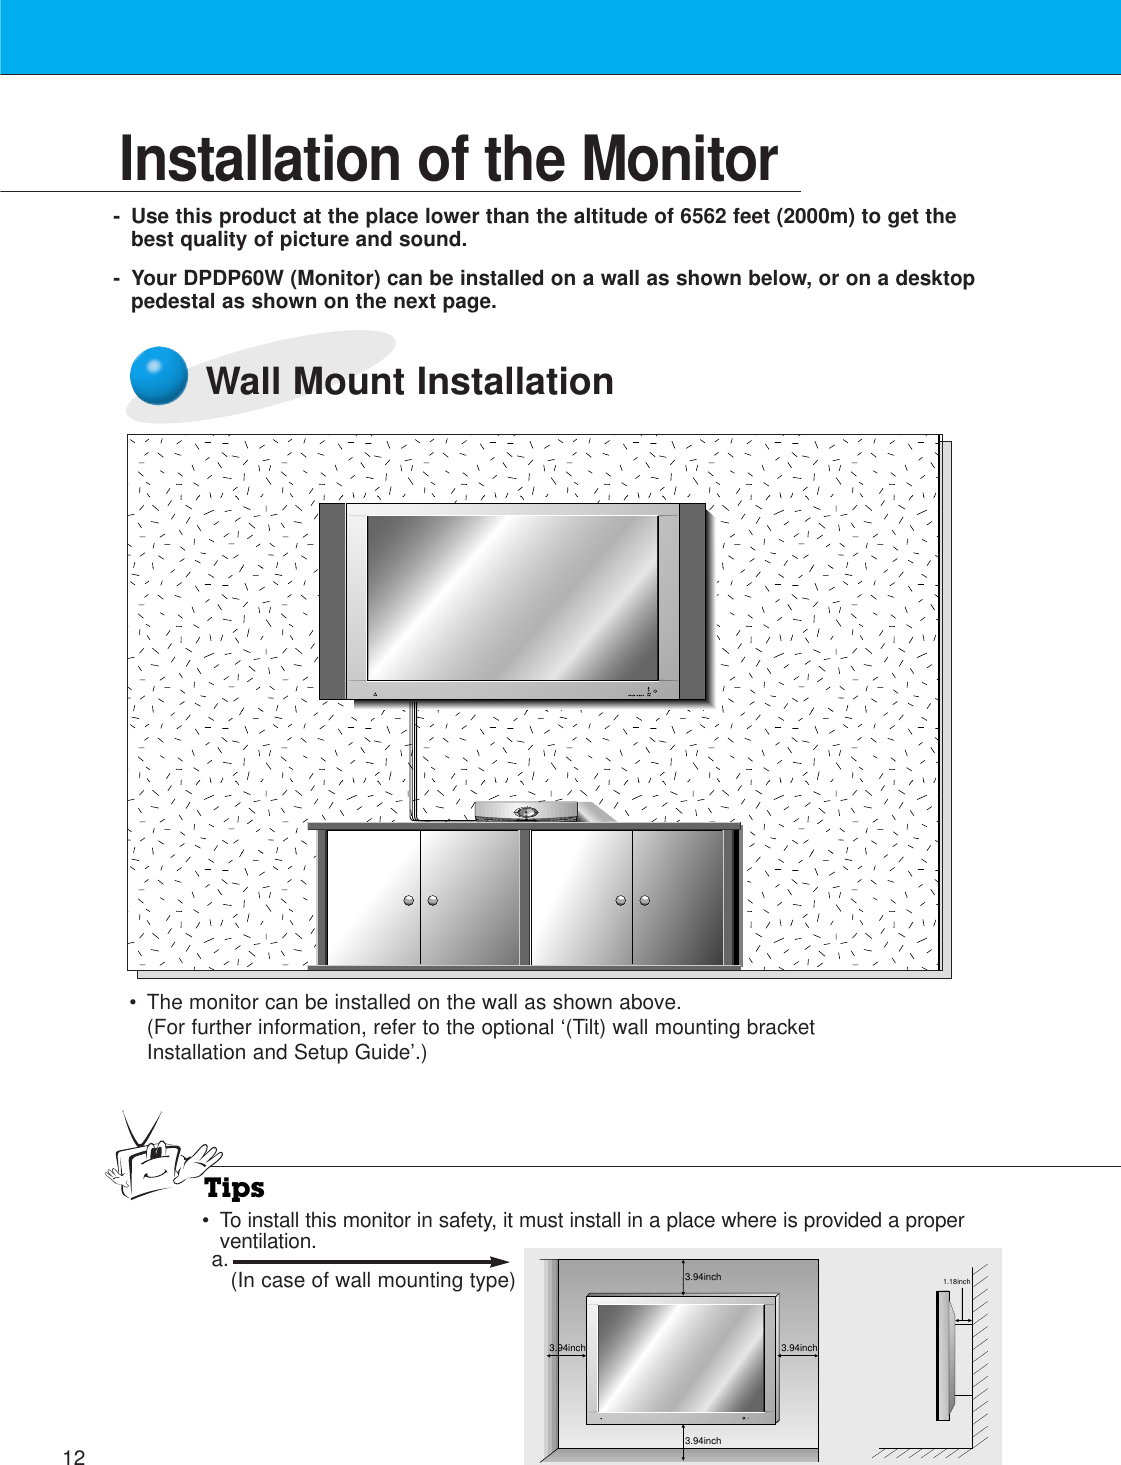 12Installation of the Monitor-Use this product at the place lower than the altitude of 6562 feet (2000m) to get thebest quality of picture and sound.- Your DPDP60W (Monitor) can be installed on a wall as shown below, or on a desktoppedestal as shown on the next page.Wall Mount Installation•The monitor can be installed on the wall as shown above.(For further information, refer to the optional ‘(Tilt) wall mounting bracketInstallation and Setup Guide’.)Tips• To install this monitor in safety, it must install in a place where is provided a properventilation.3.94inch3.94inch3.94inch3.94inch1.18incha. (In case of wall mounting type)